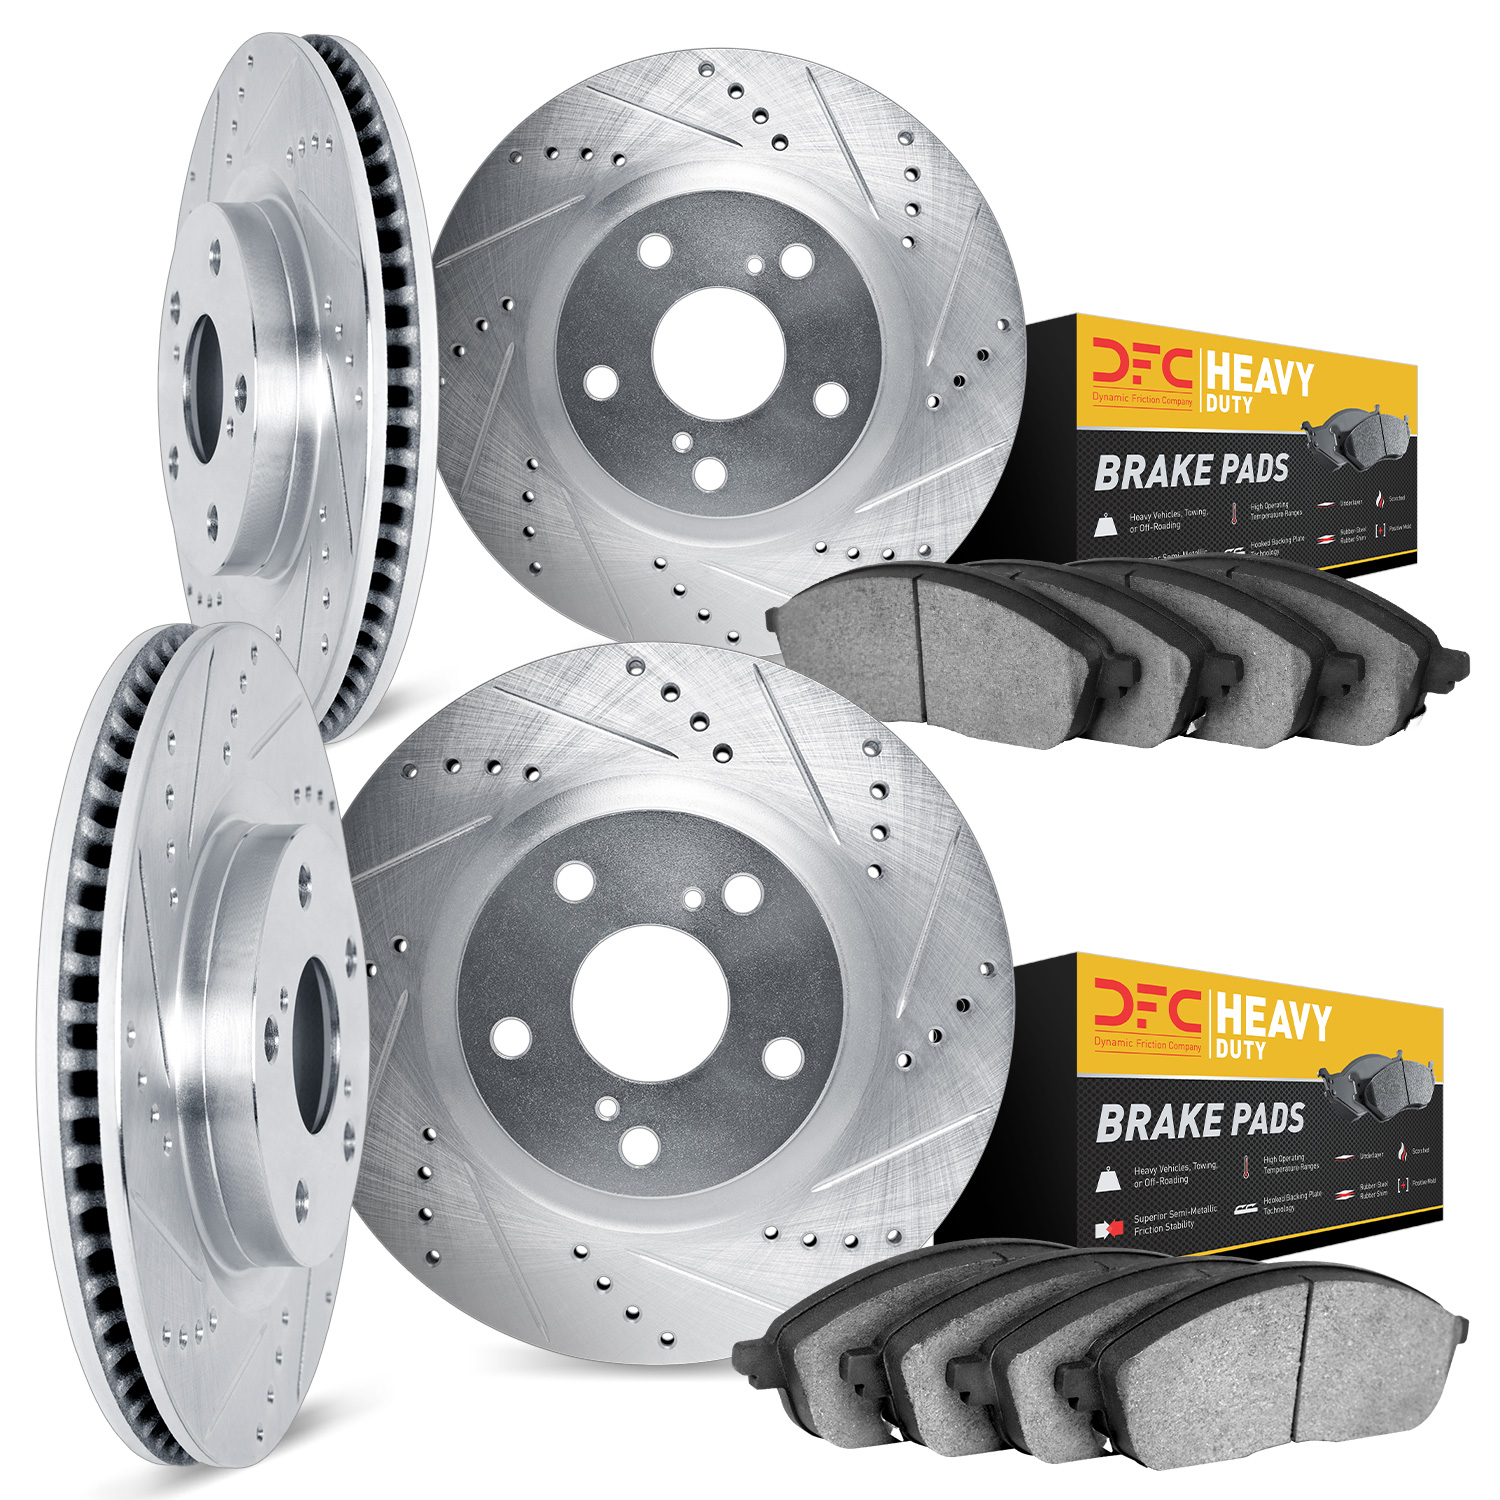 7204-39055 Drilled/Slotted Rotors w/Heavy-Duty Brake Pads Kit [Silver], Fits Select Mopar, Position: Front and Rear